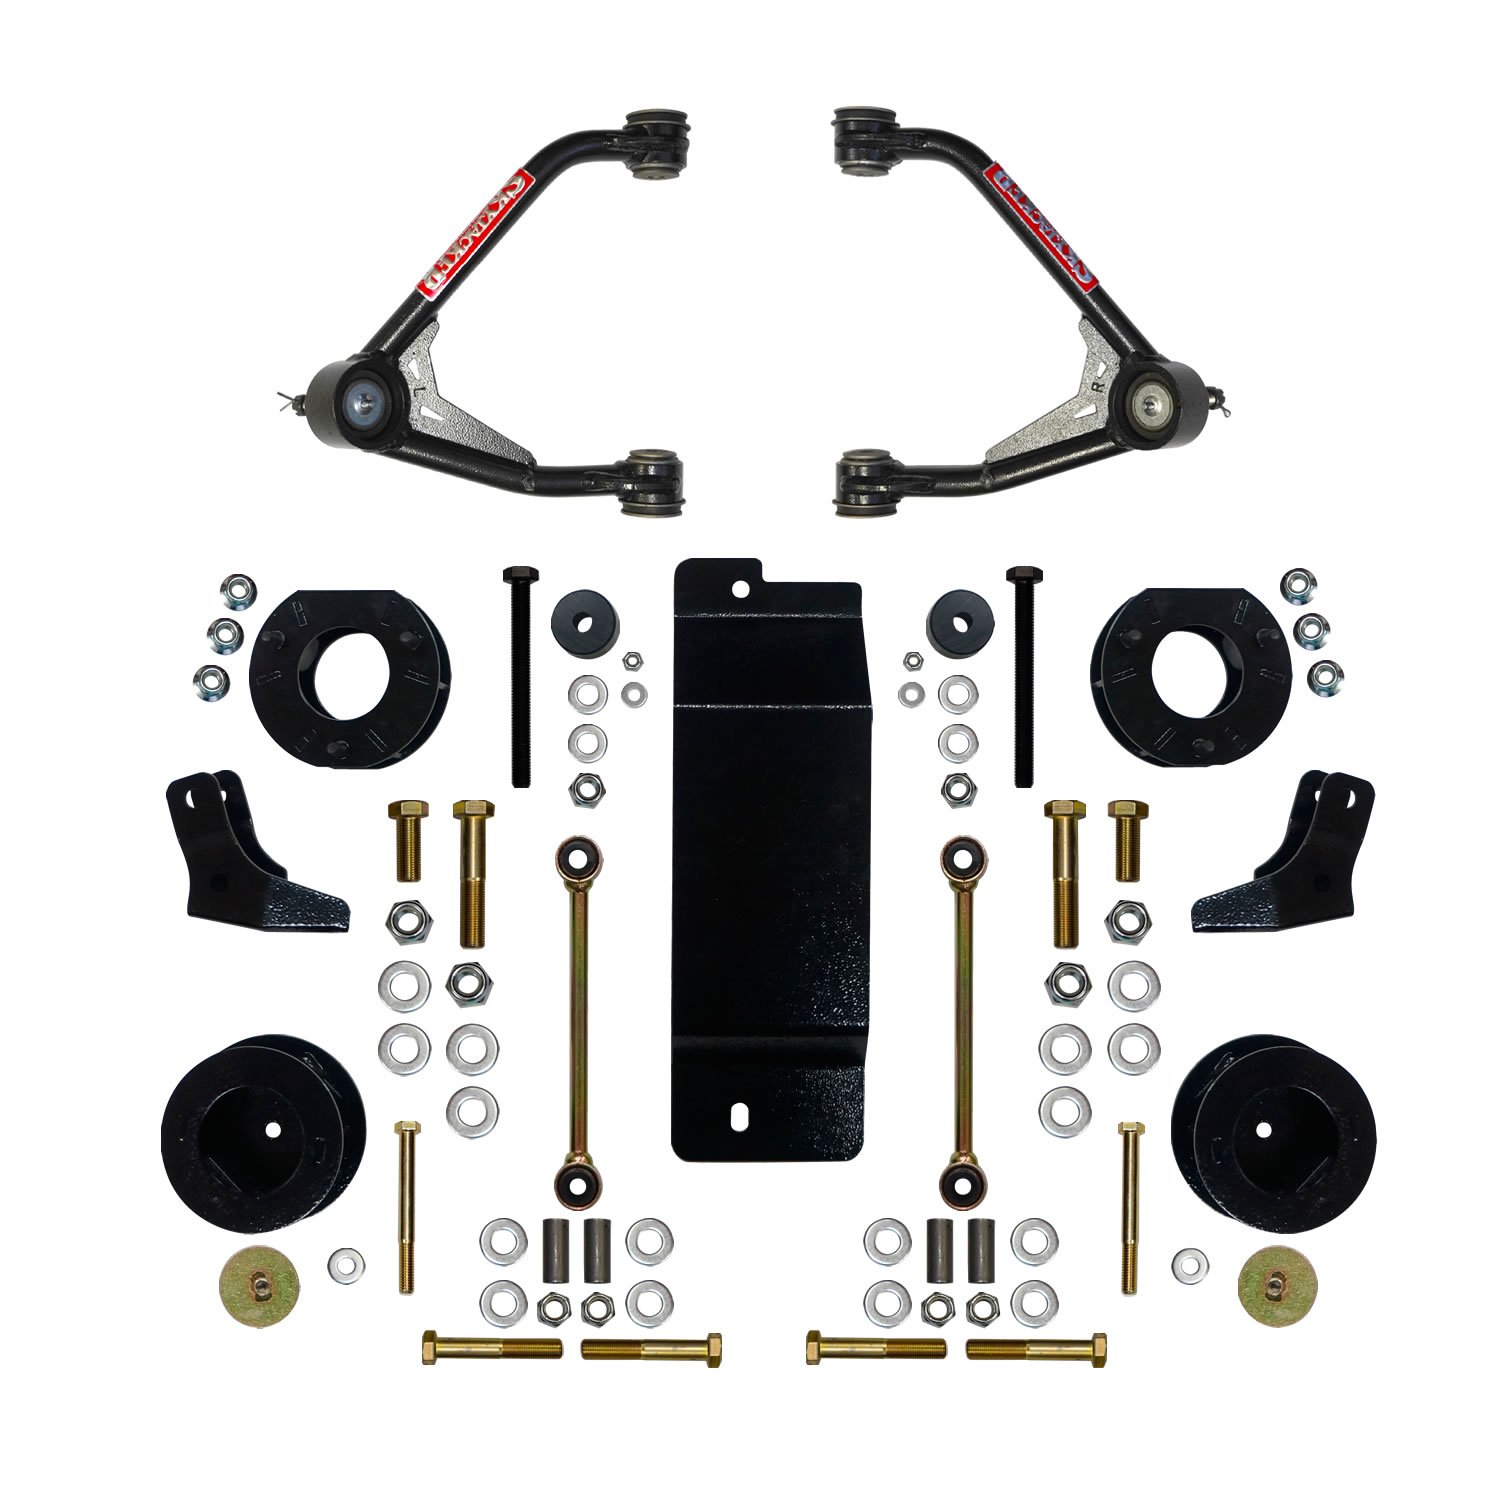 3.500-4.000 In. Upper Control Arm Lift Kit with Rear Shock Brackets for 2015-2019 GM SUV